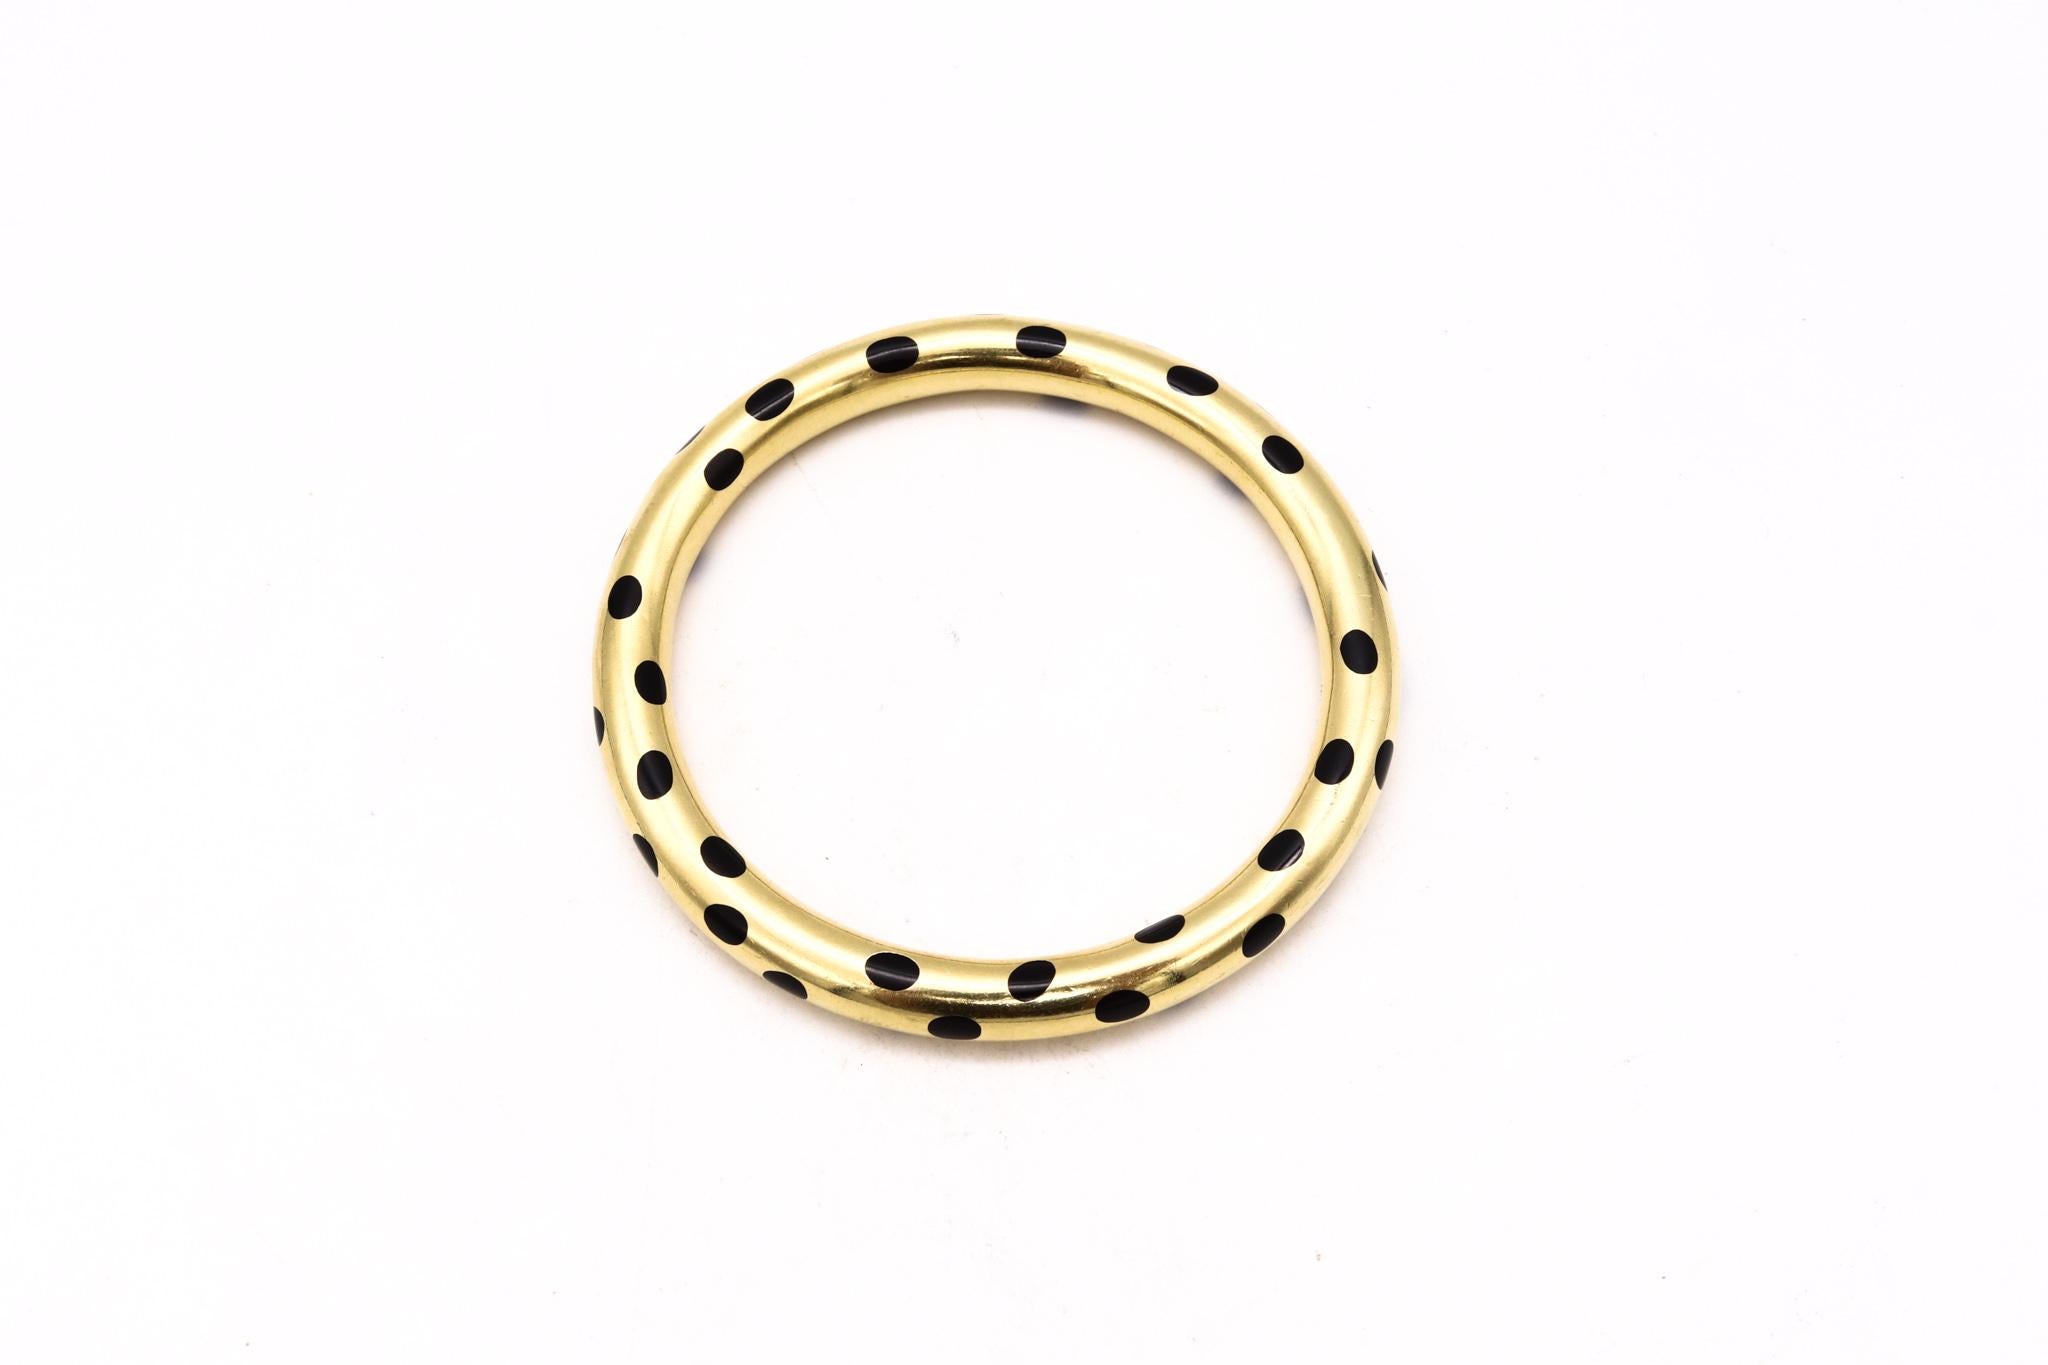 Dotted bangle designed by Angela Cummings for Tiffany & Co.

This unusual bangle was part of the Tiffany & Co. collection from the years of 1975 and 1976. Commonly known as the Dalmatian bangle, was crafted by Angela Cummings in solid yellow gold of